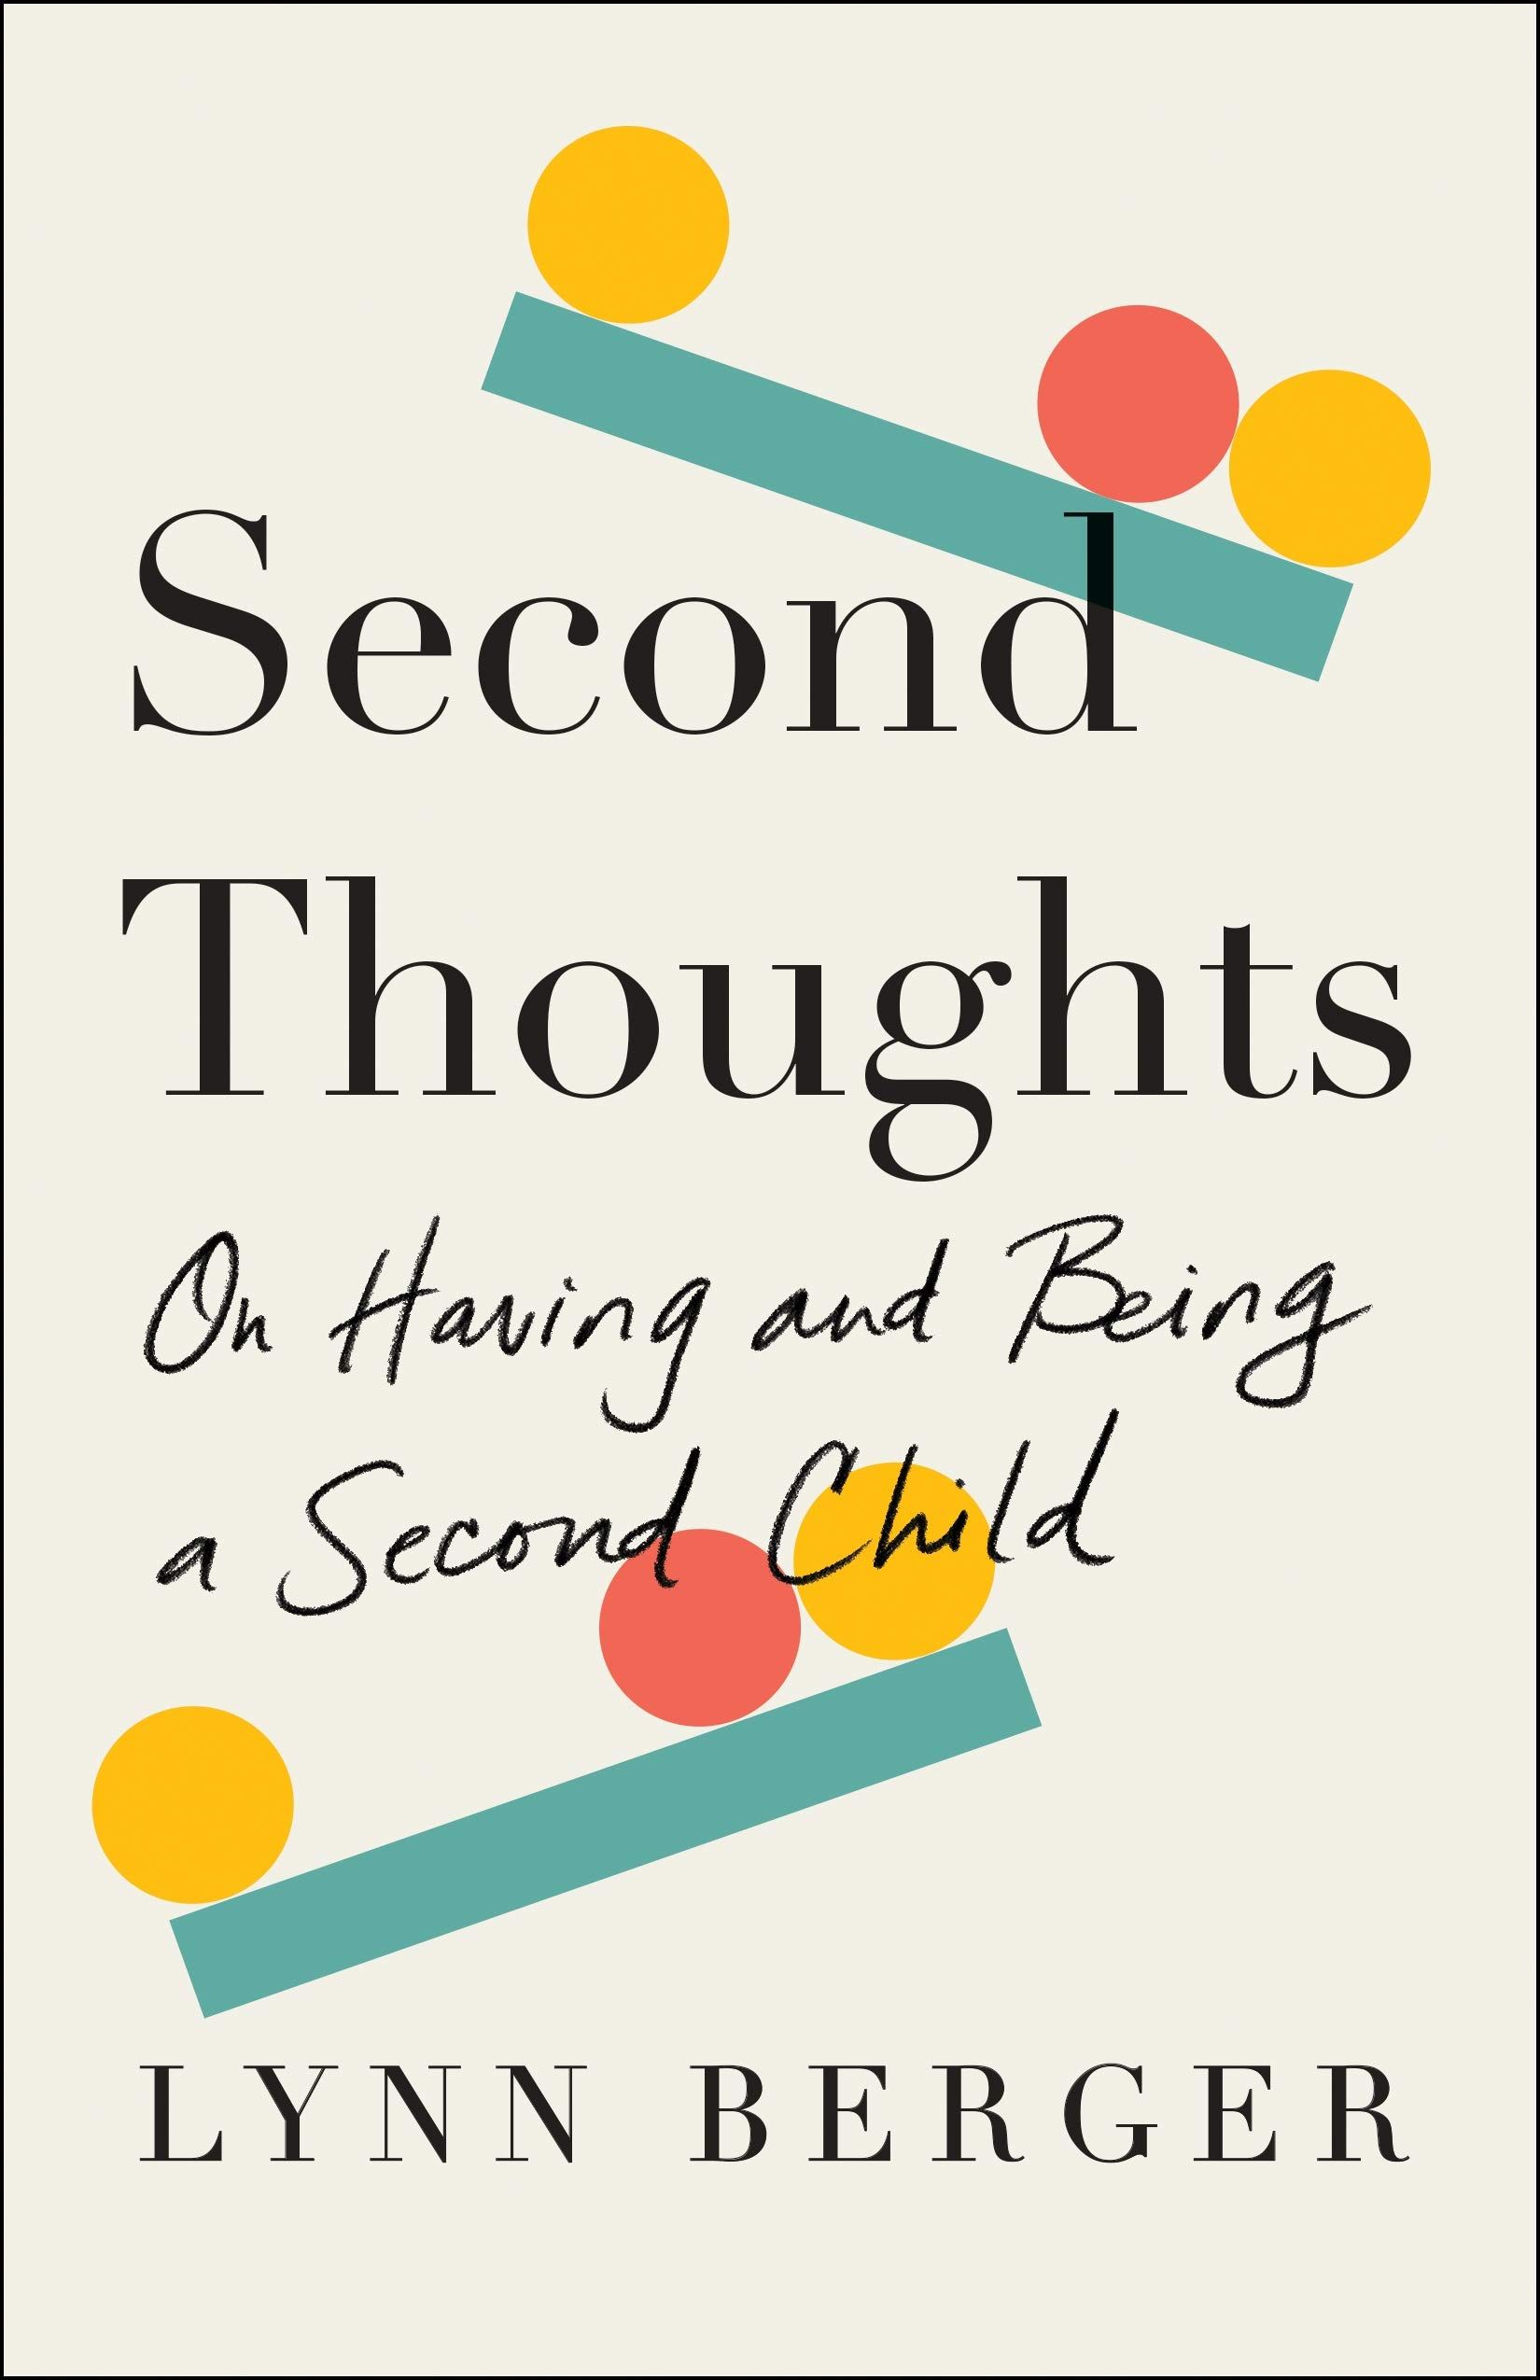 Second Thoughts book cover